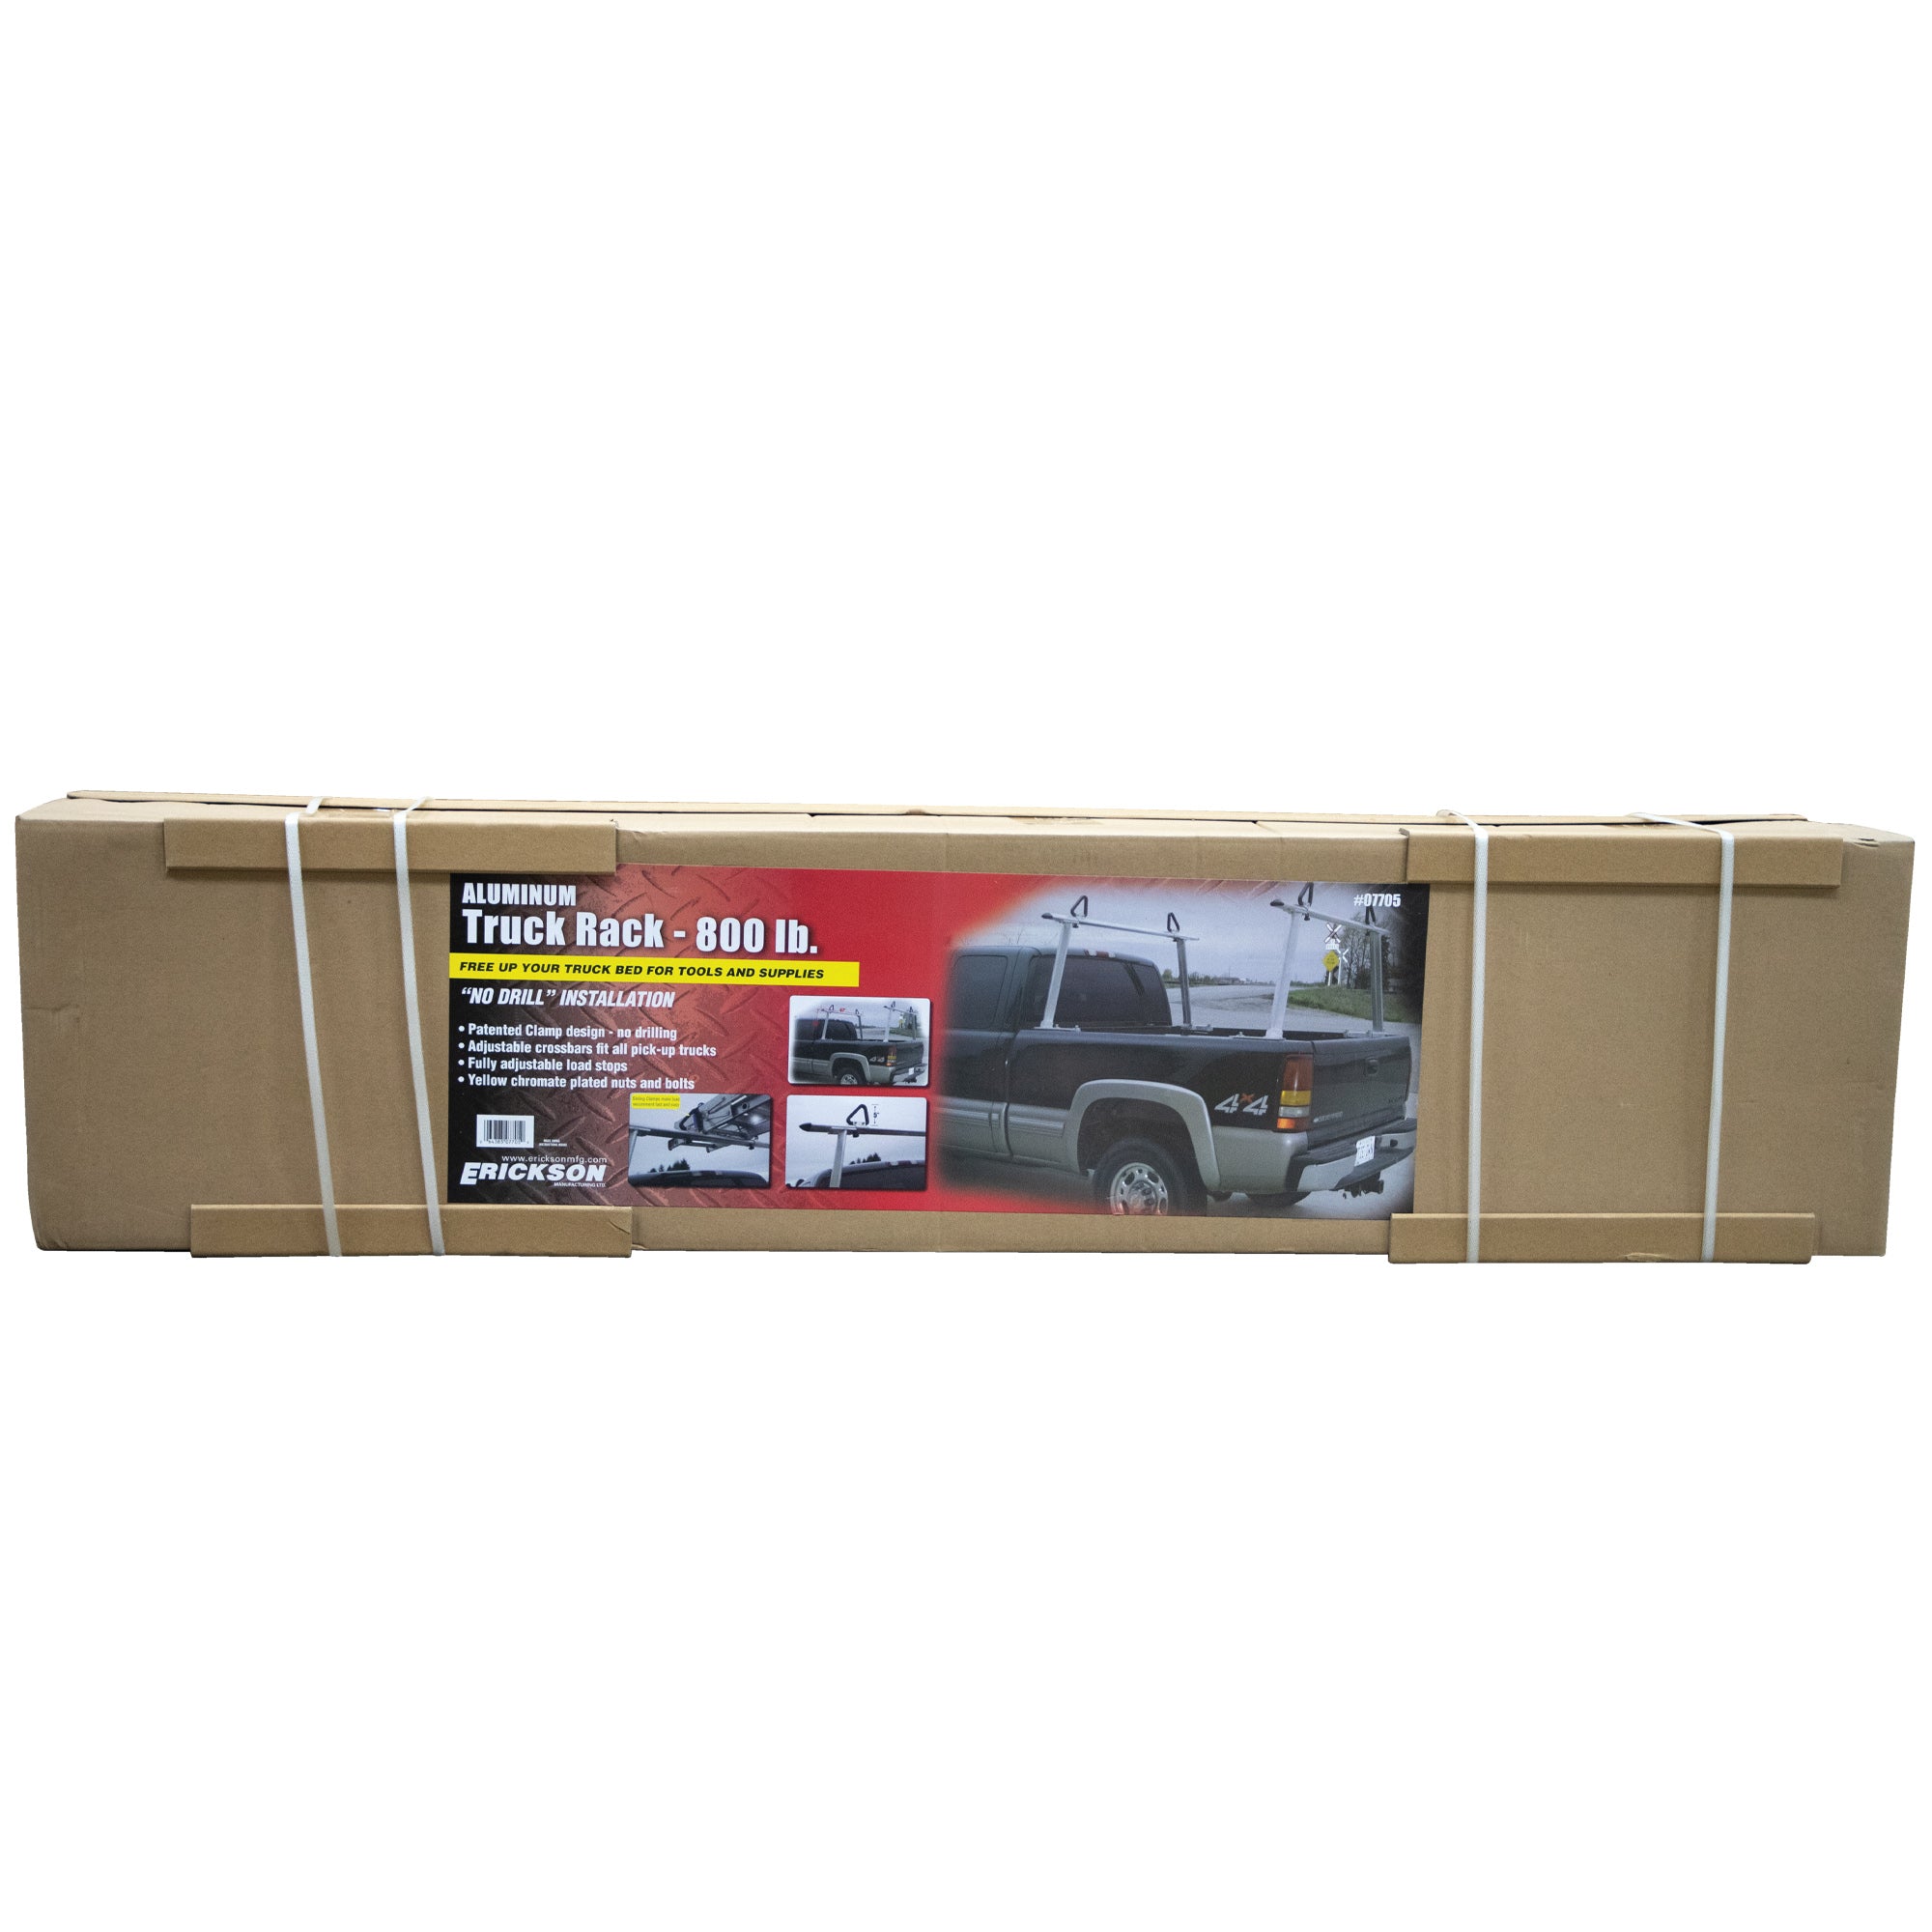 Truck Rack Aluminum for All Trucks 800 Lbs Rated